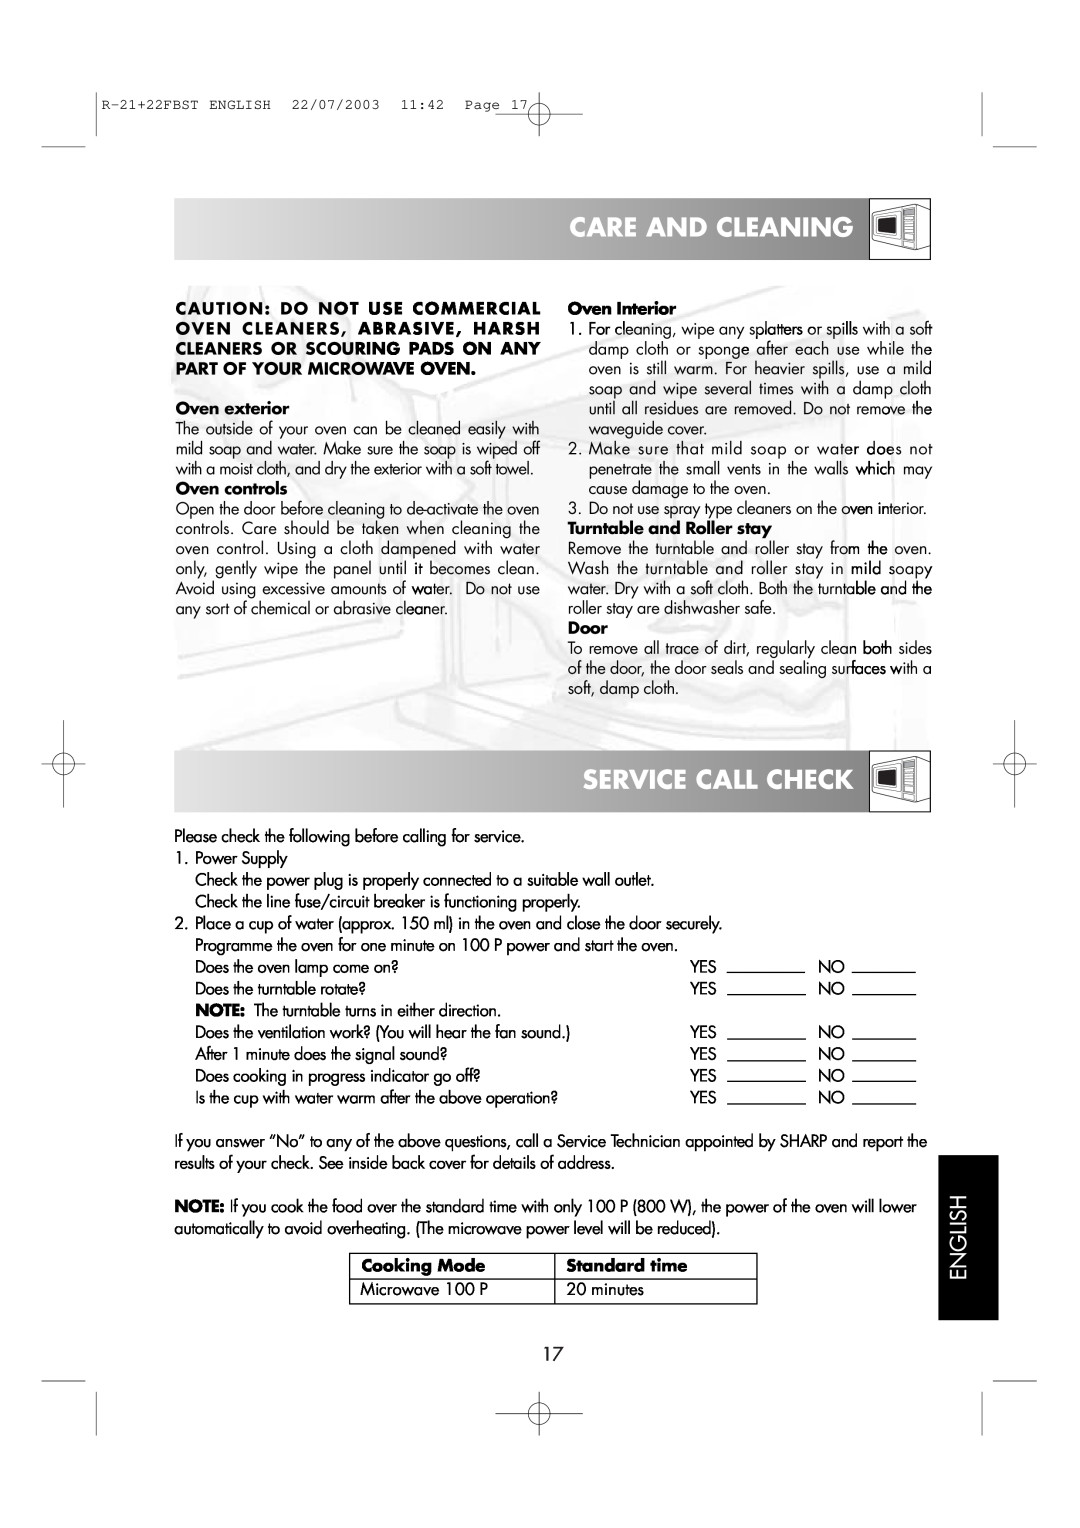 Sharp R-21 FBST, R-22FBST operation manual Care And Cleaning, Service Call Check, English 